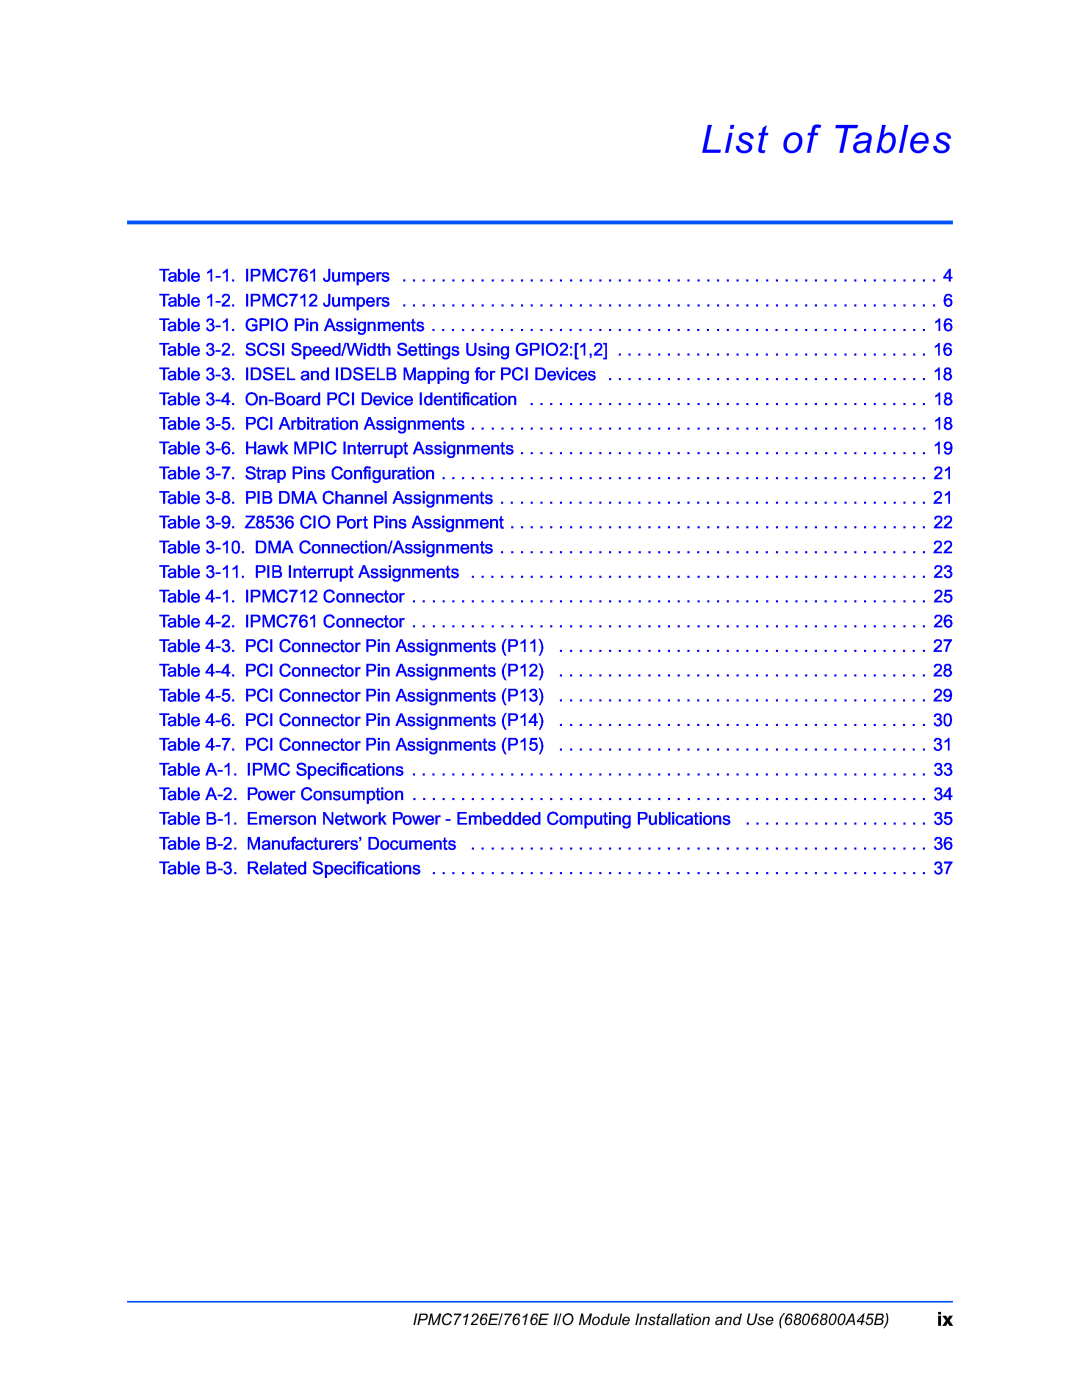 Emerson IPMC7126E, IPMC7616E manual List of Tables, 3. IDSEL and IDSELB Mapping for PCI Devices 